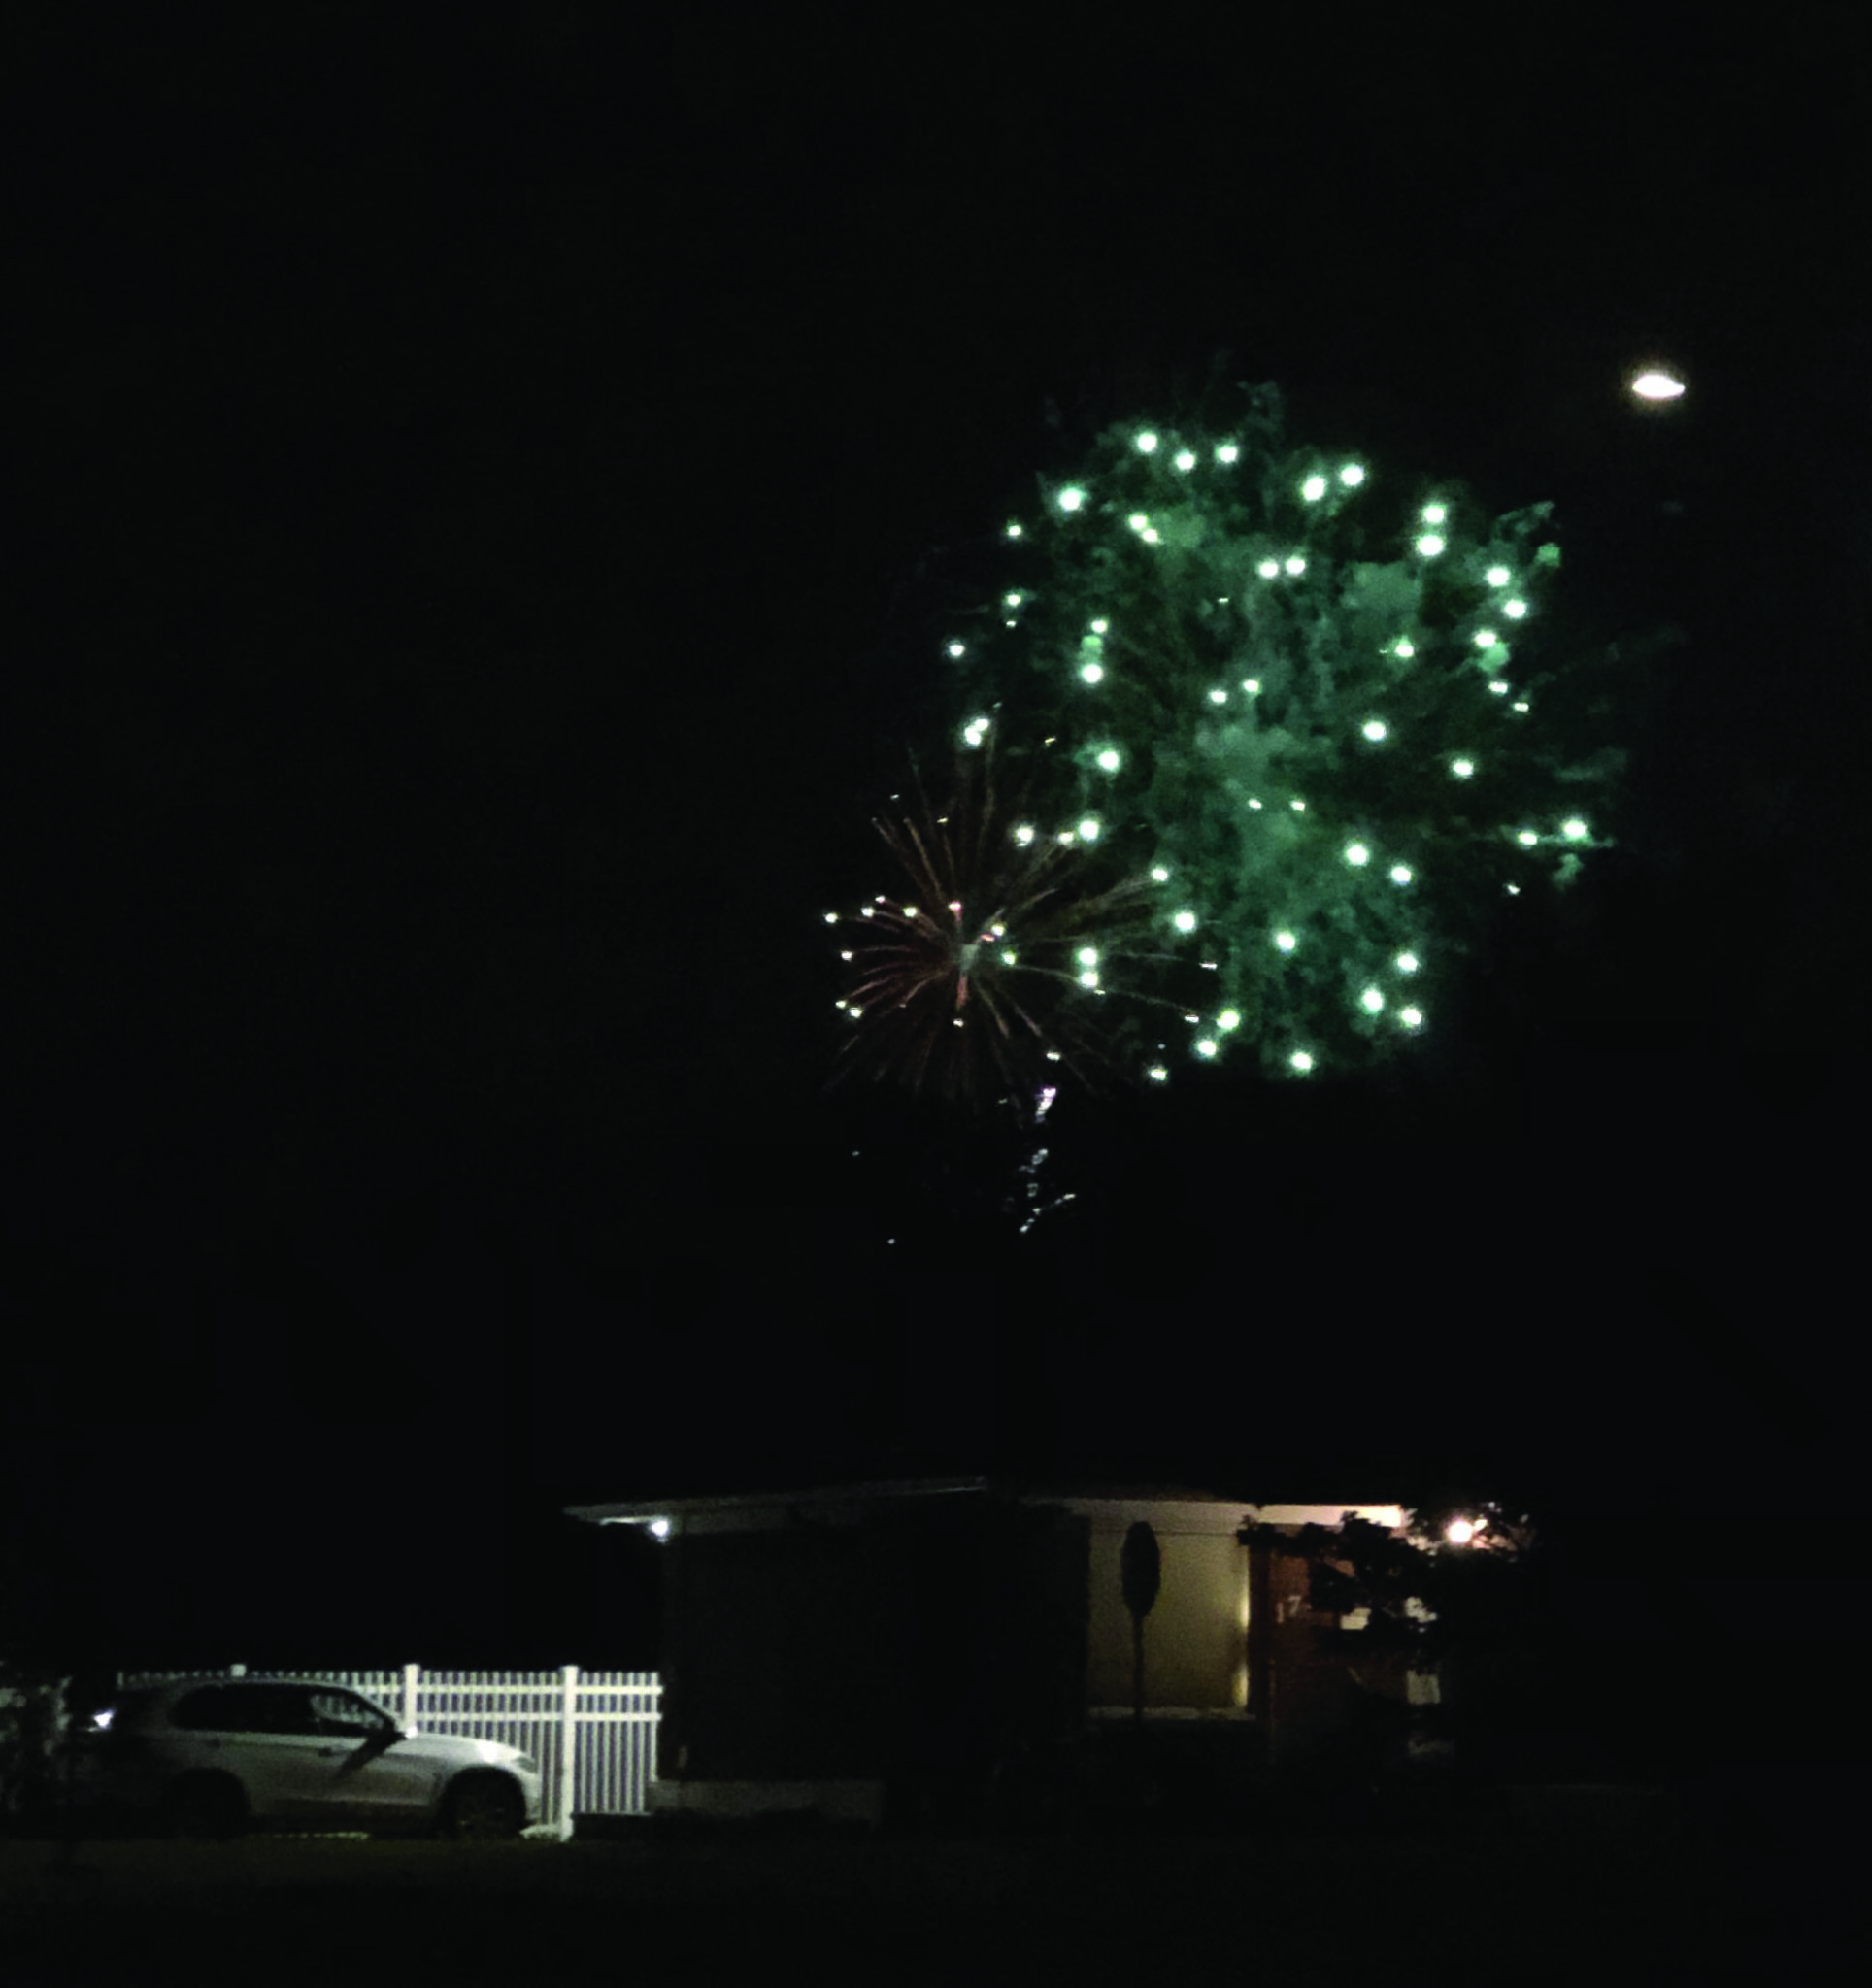 Fireworks over Algonquin College's parking lot could be seen from the surrounding neighbourhood on Sept. 8.